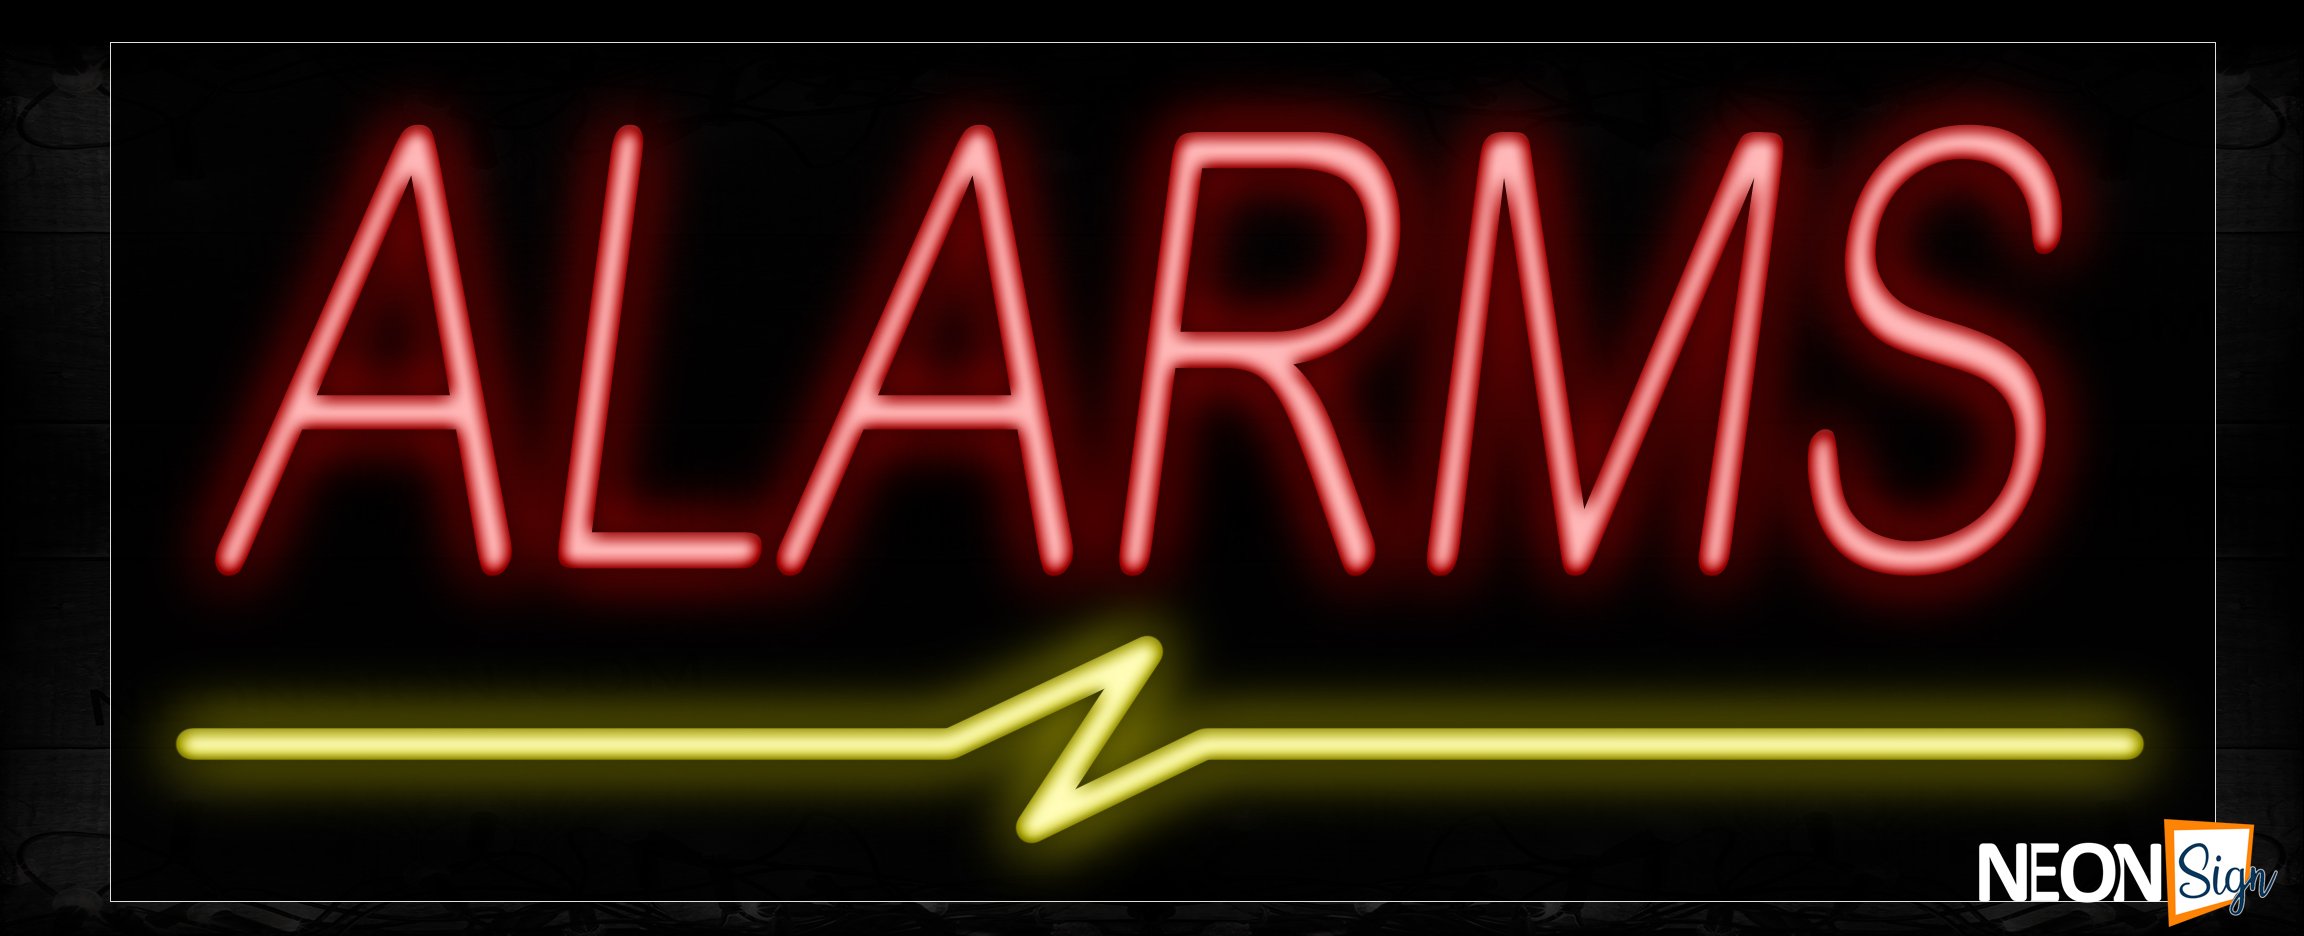 Image of 10007 Alarms with wavy underline Neon Sign_13x32 Black Backing